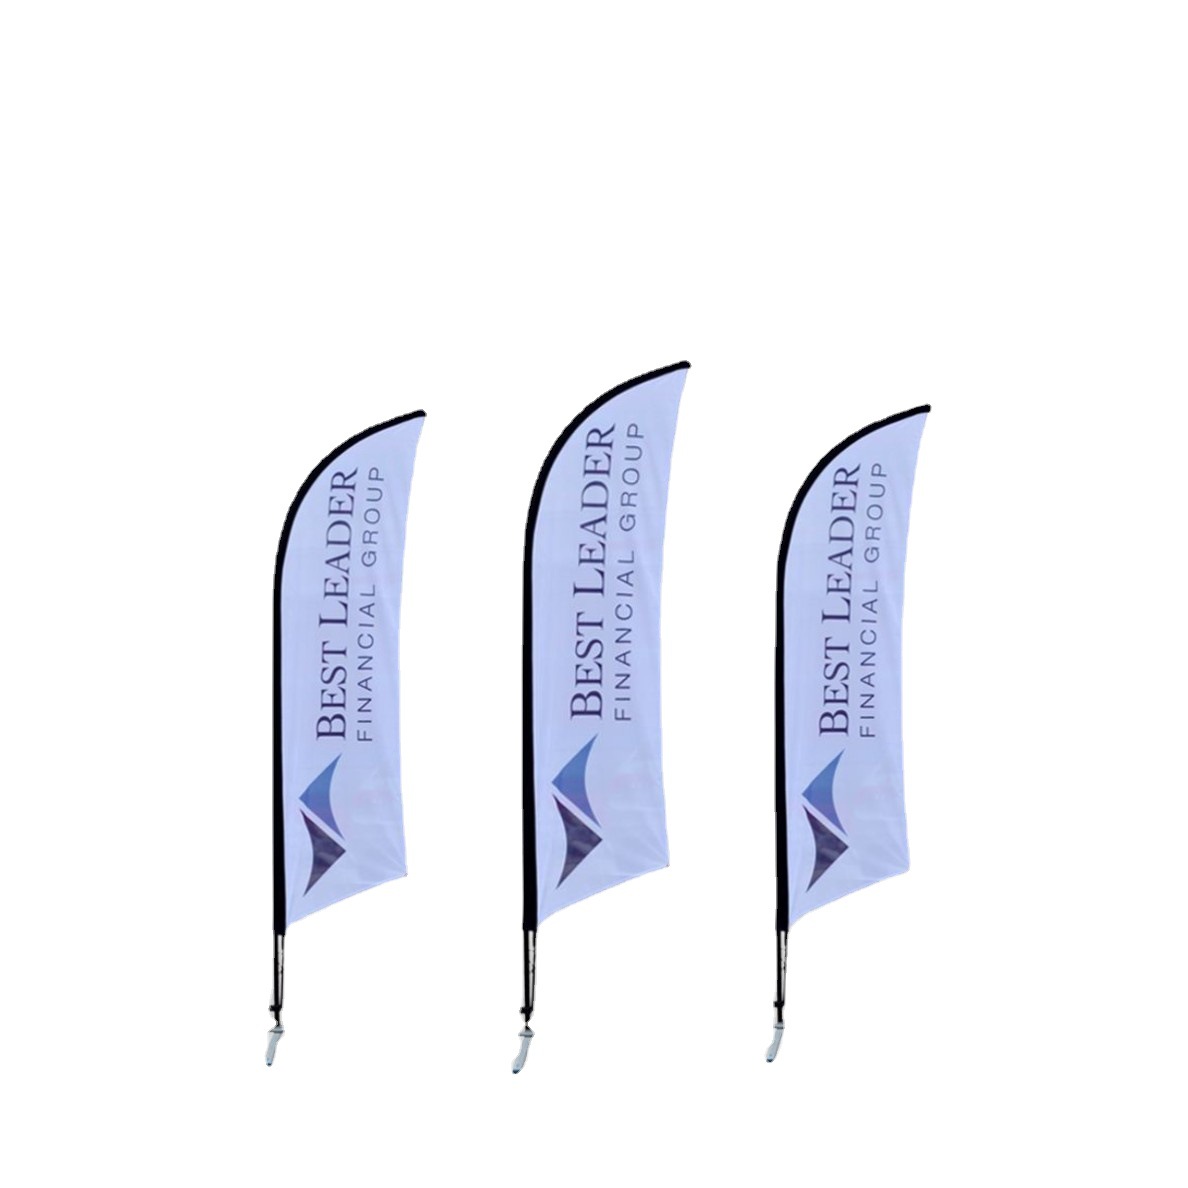 Feather Flag with Pole Kit and Ground Stake Open Signs Swooper Flag Advertisng Feather Banner 